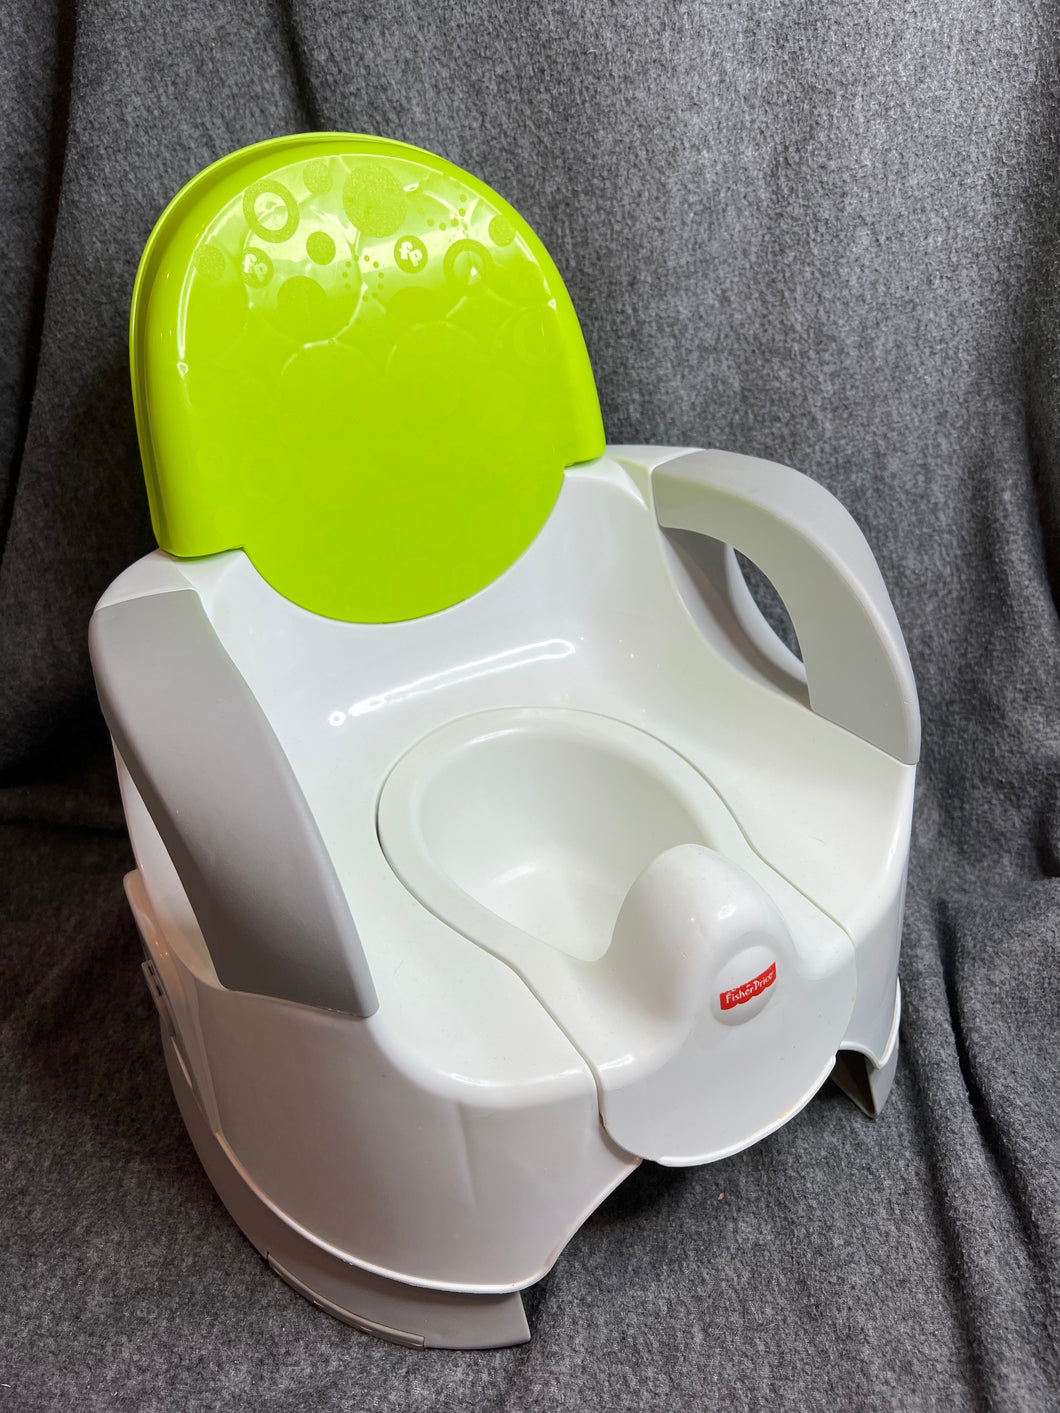 Fisher-Price Potty for Toilet Training with Armrests One Size